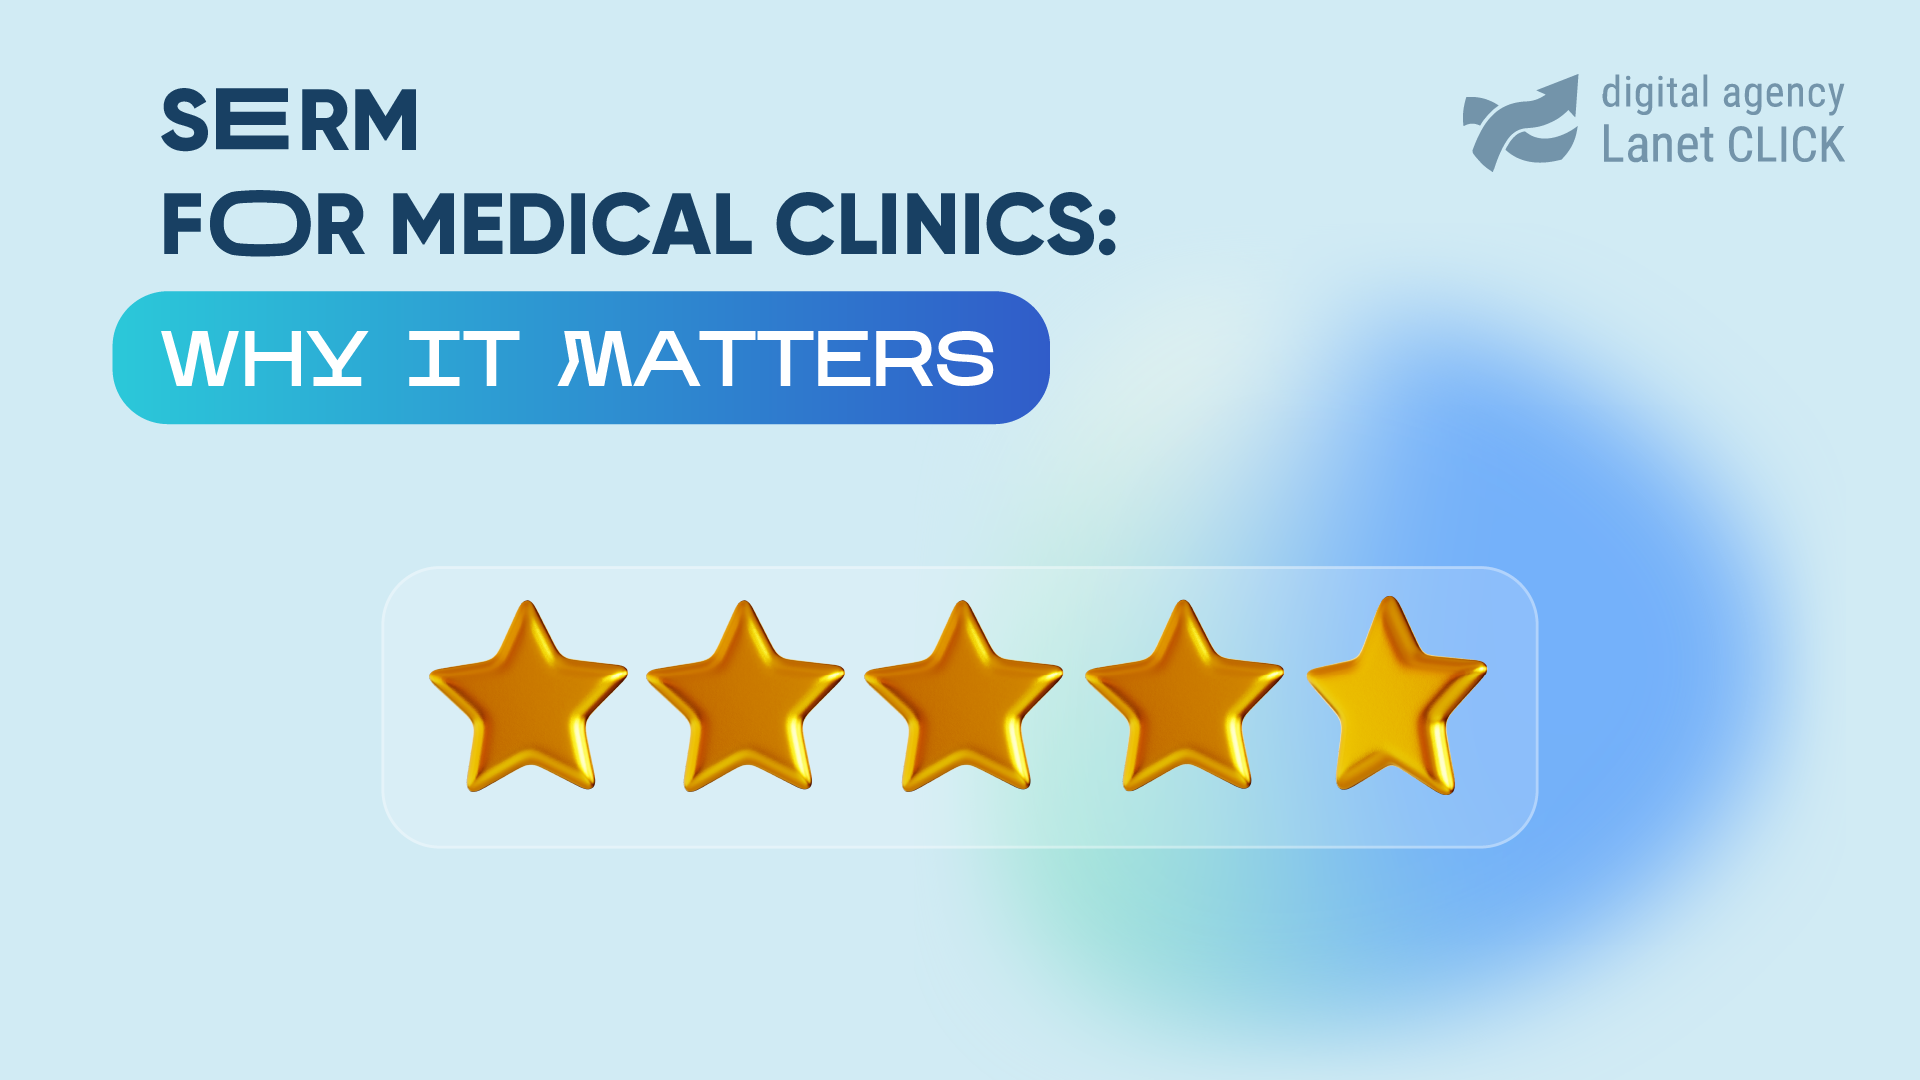 SERM for medical clinics: why it matters